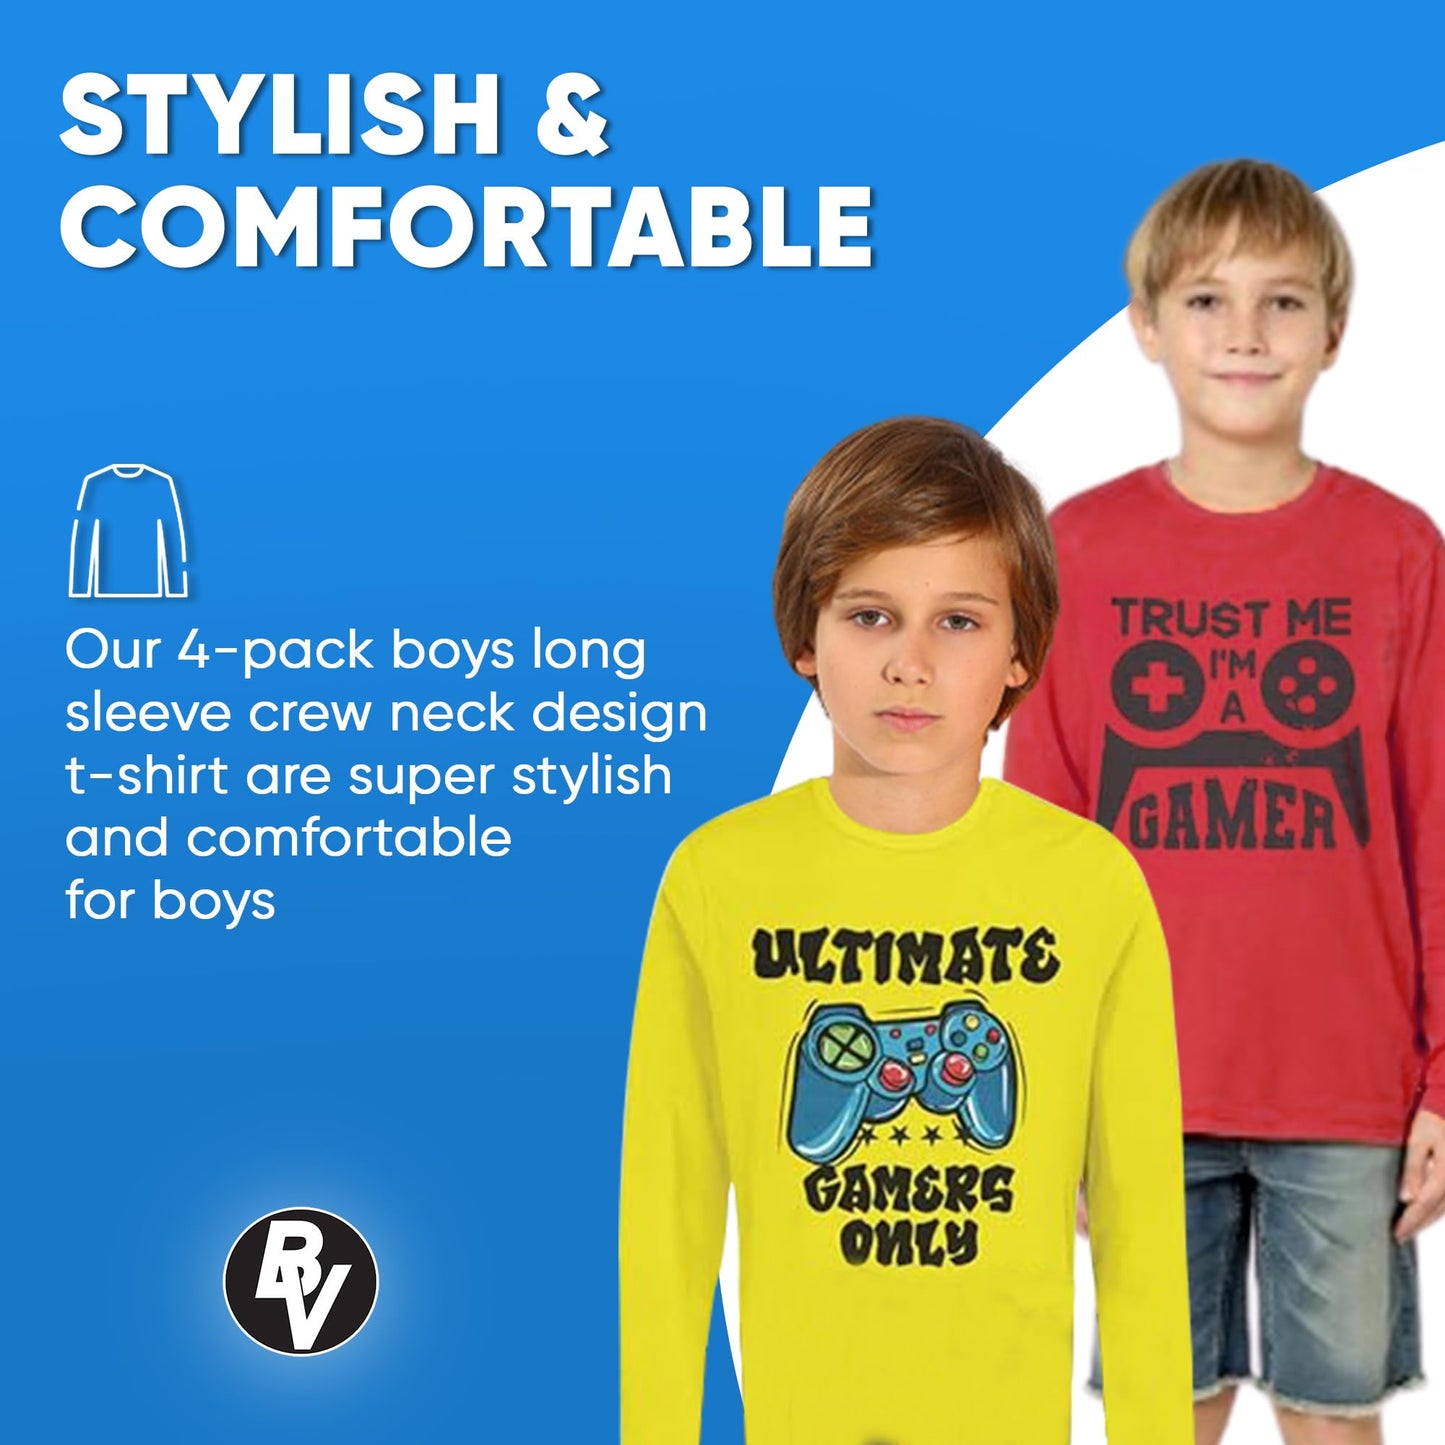 BROOKLYN VERTICAL 4-Pack Boys Long Sleeve Crew Neck T-Shirt with Chest Print | Soft Cotton Sizes 6-20